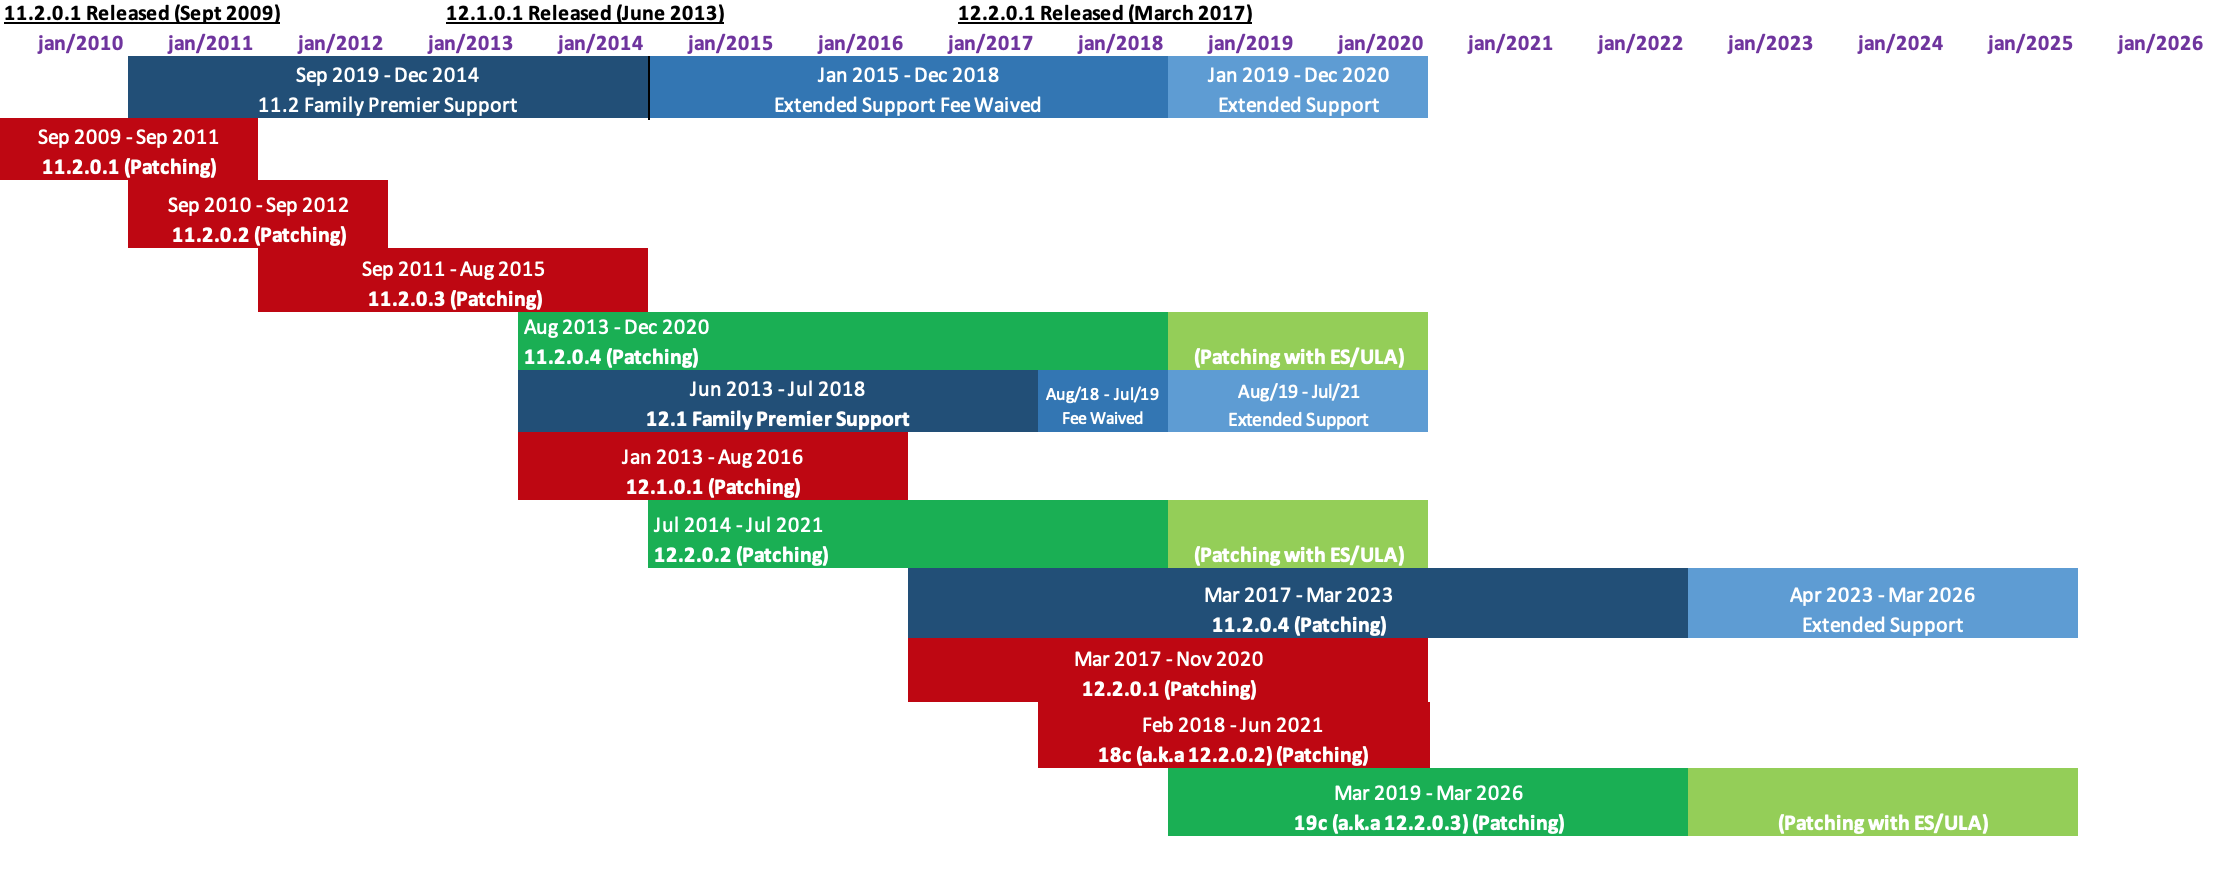 Oracle patching chart